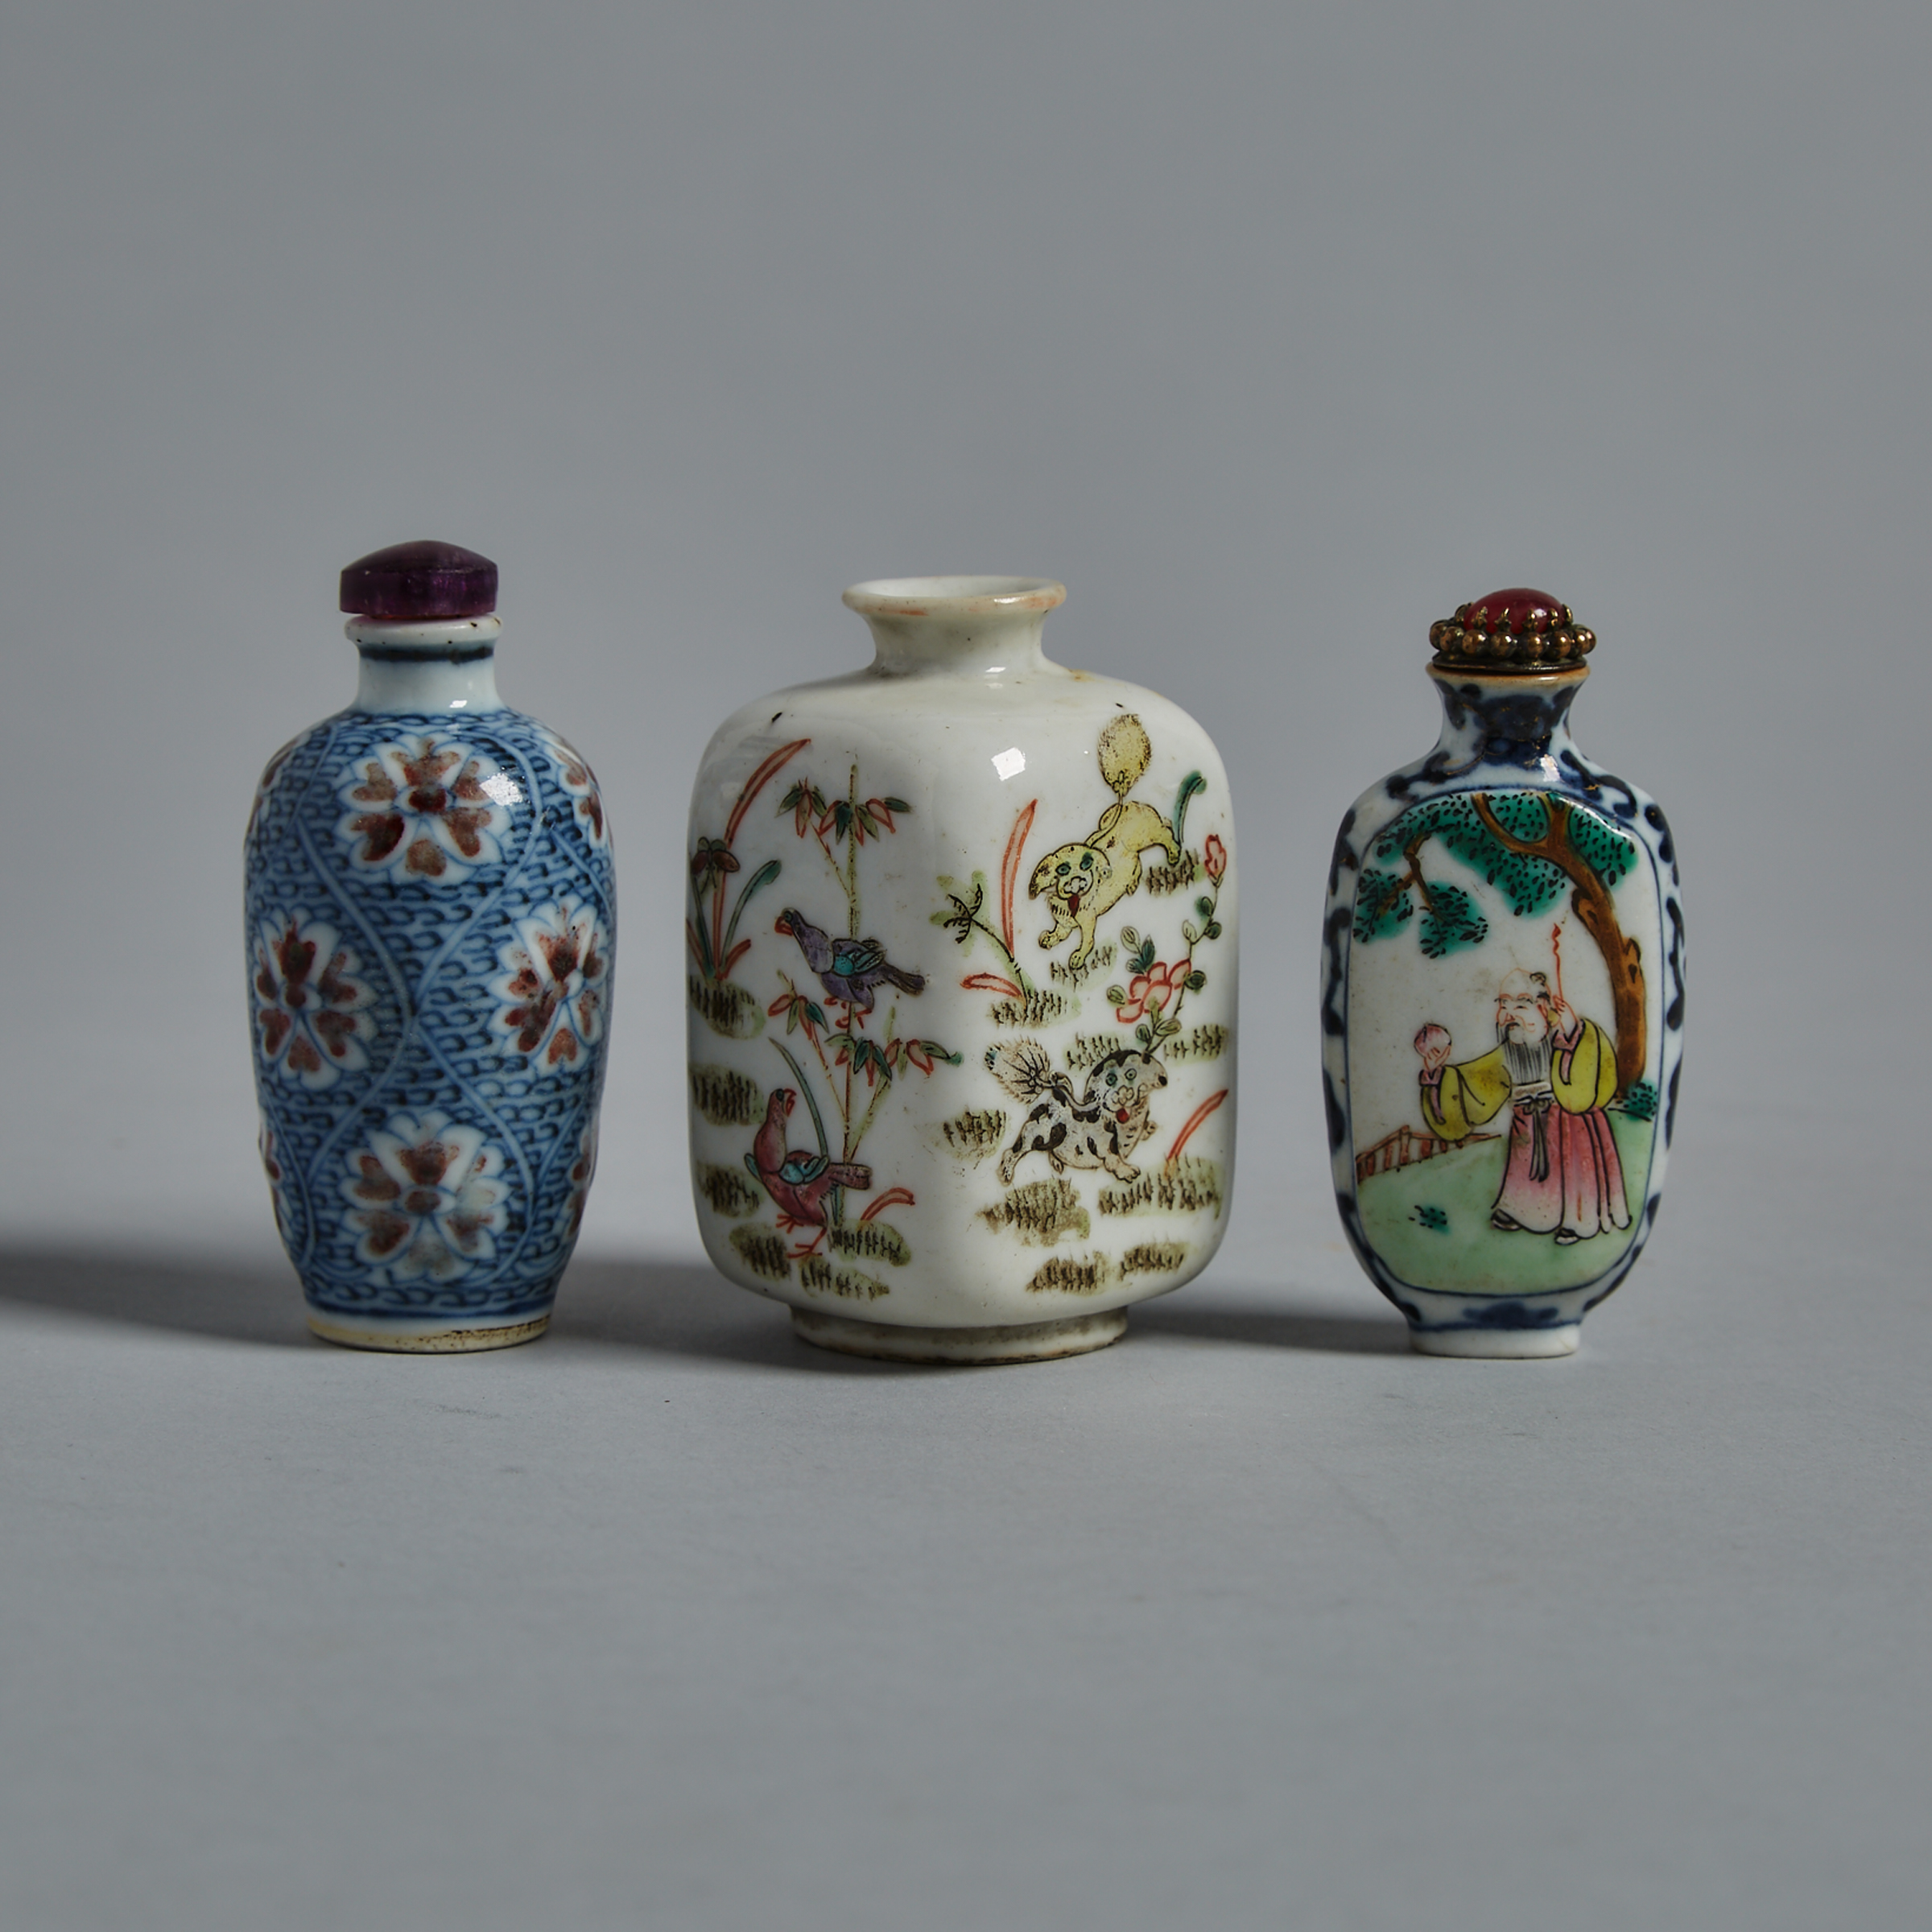 A Group of Three Porcelain Snuff Bottles